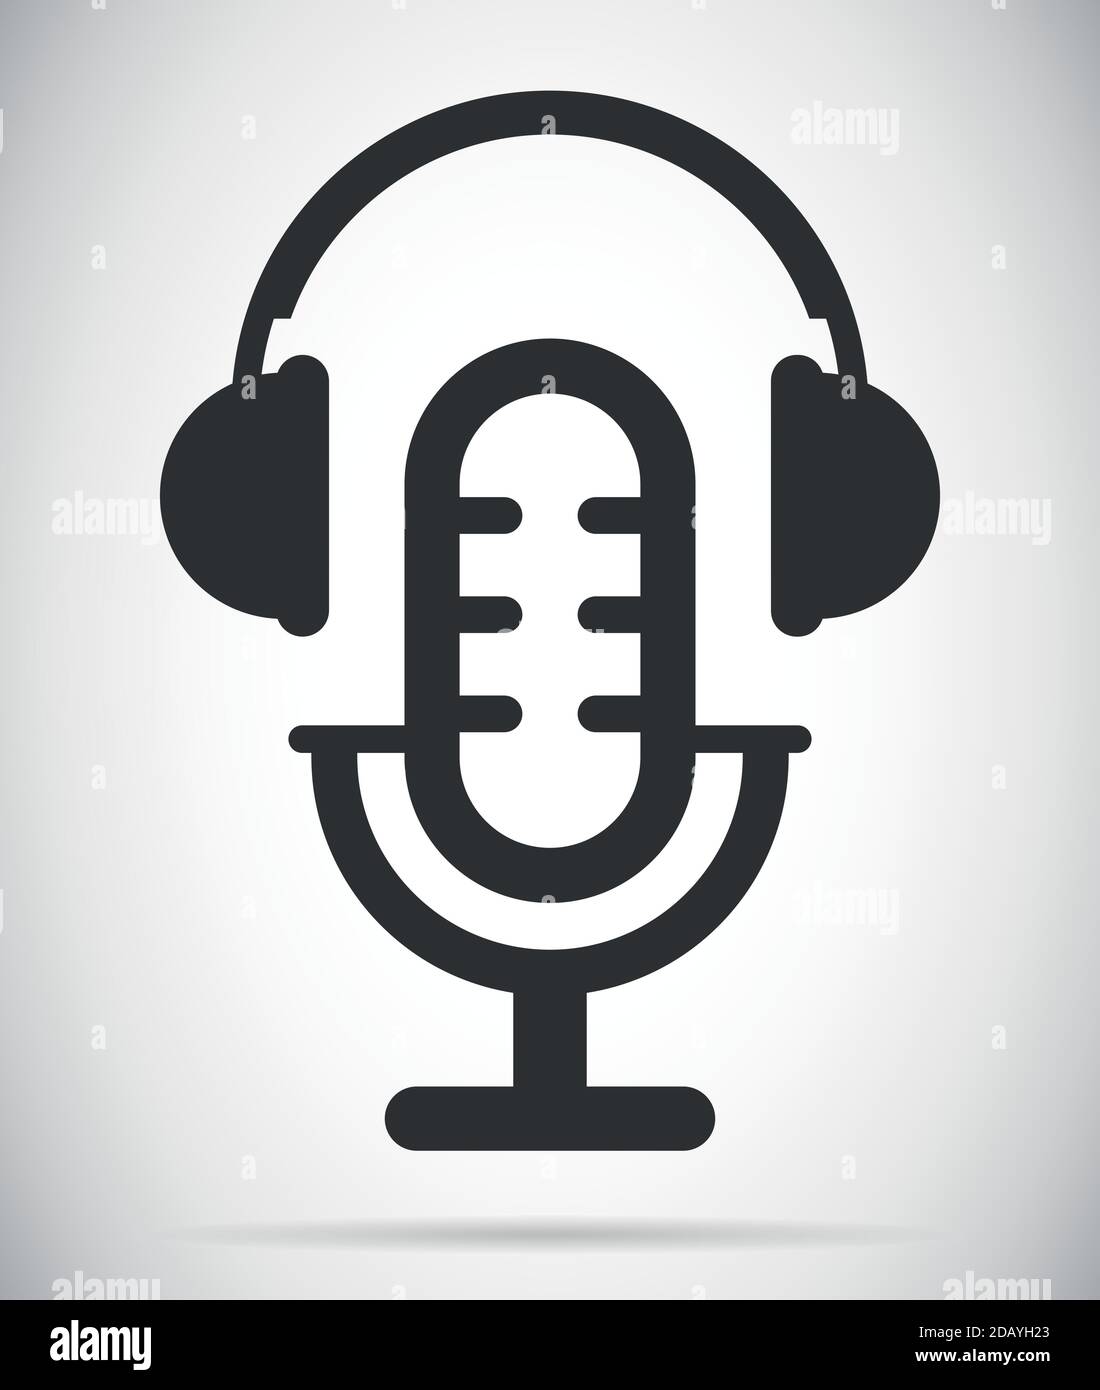 Podcast microphone and headphone symbol and icon vector illustration Stock Vector